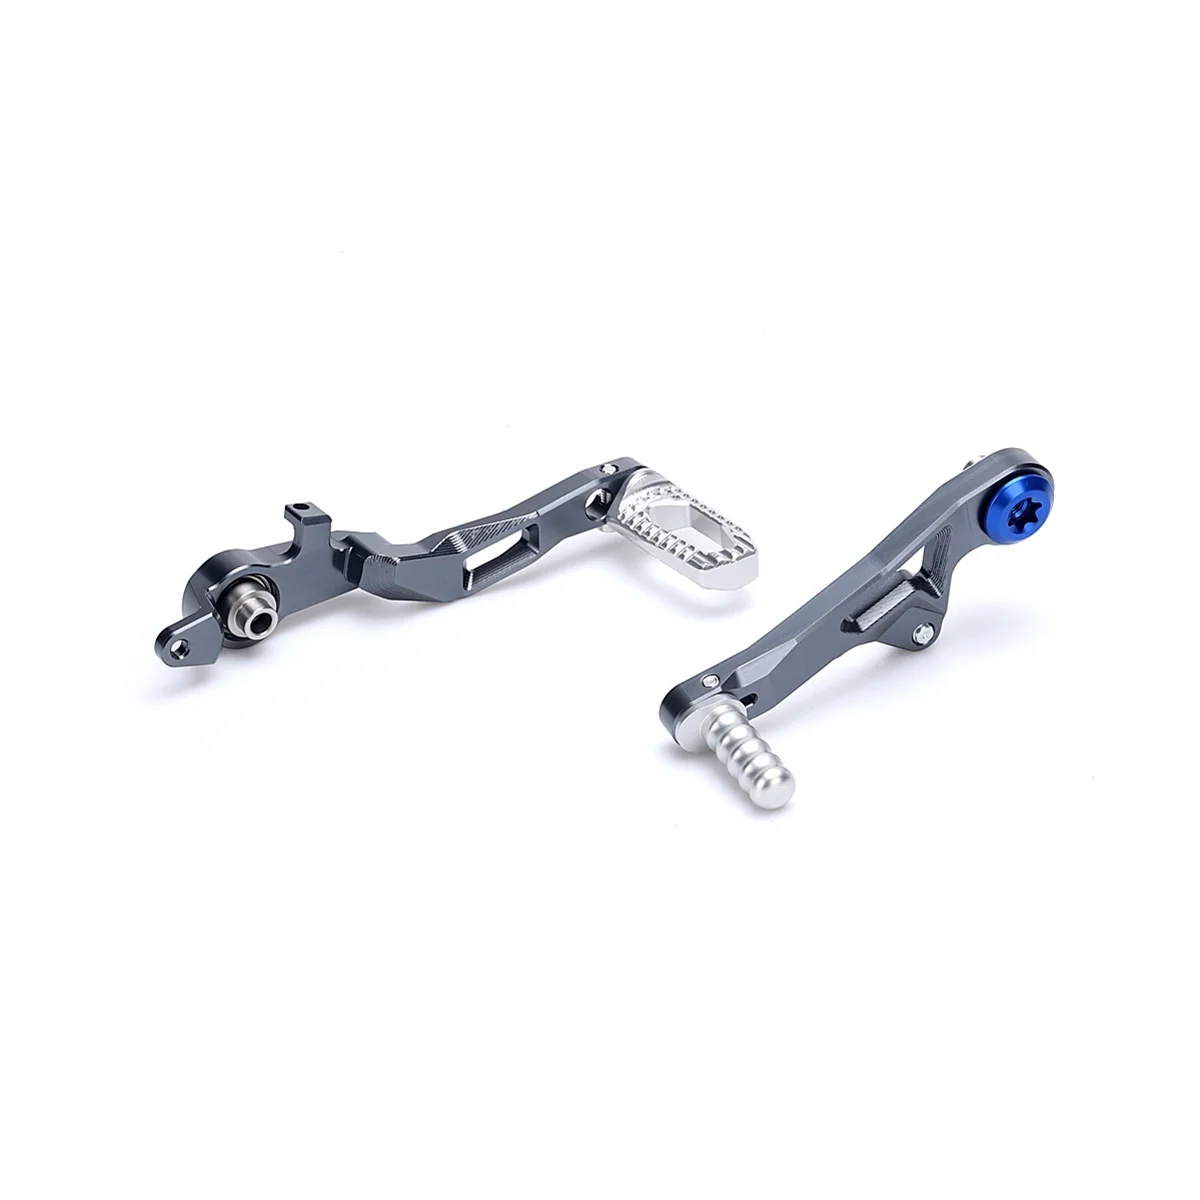 

Motorcycle Shifter Shift Brake Master Lever Foot Pedal Set for BMW R1250GS R1250 GS ADVENTURE ADV R 1250 GS HP(Titanium)